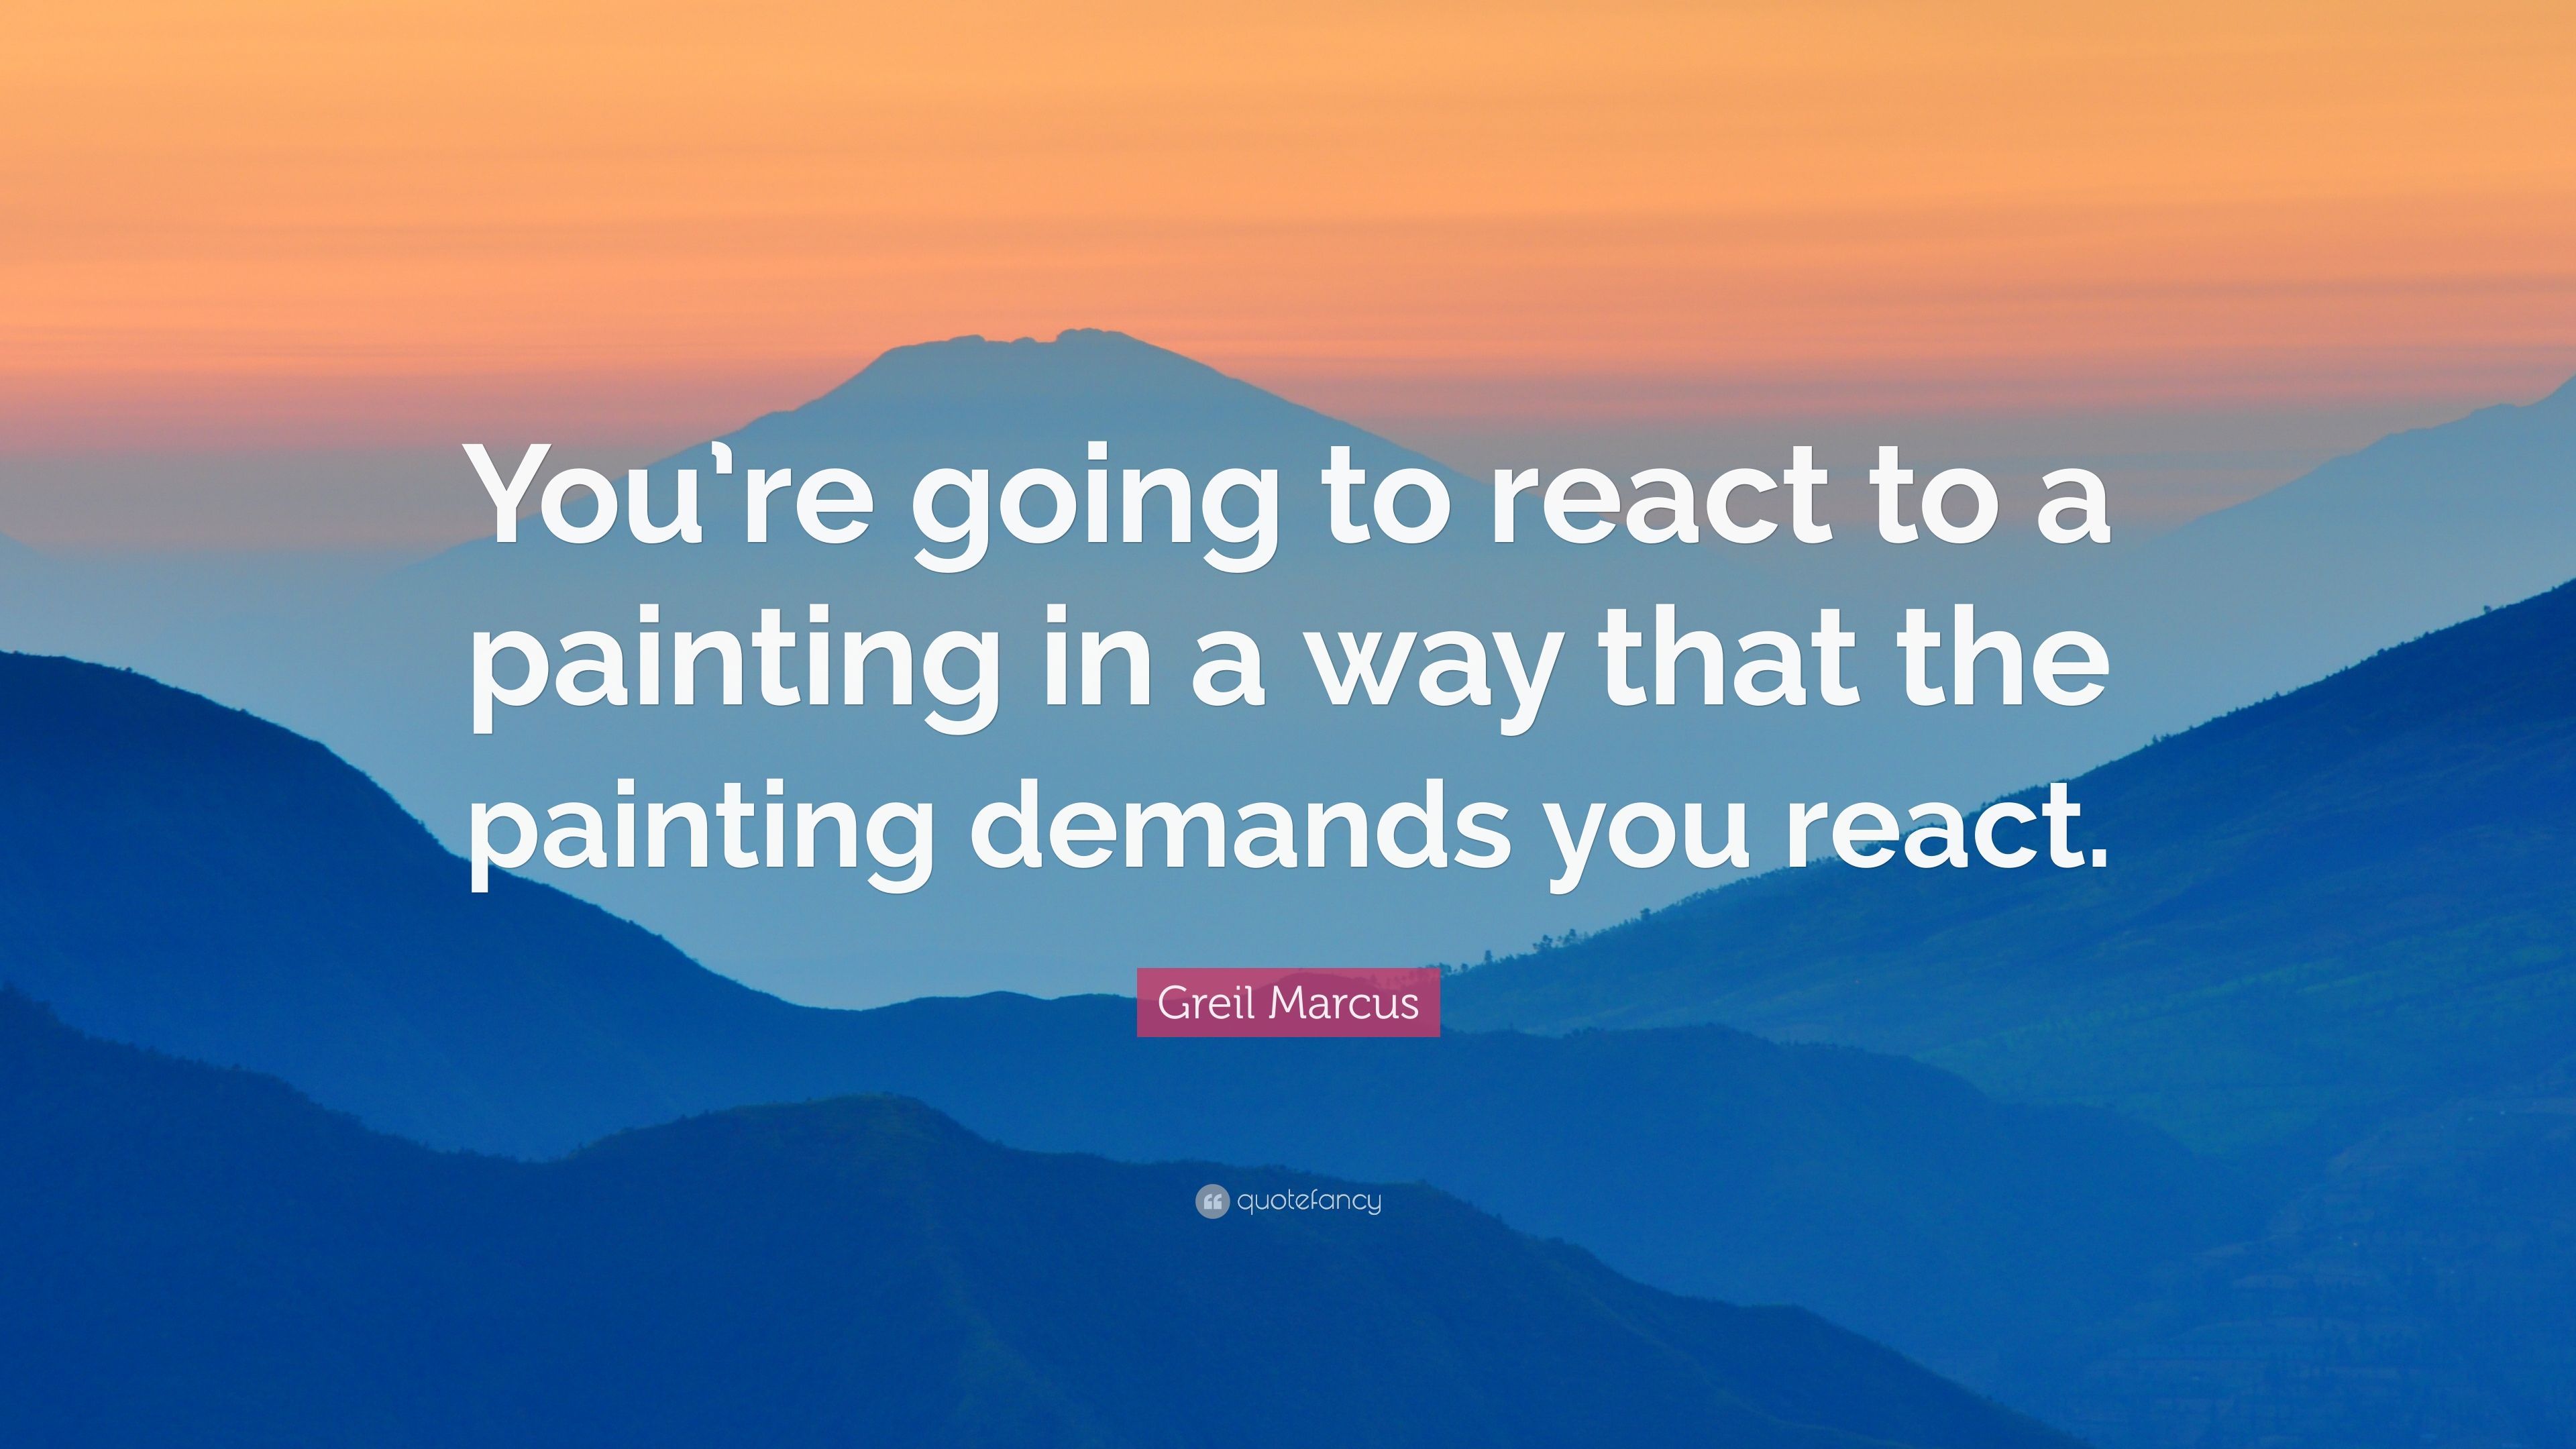 Greil Marcus Quote: “You're going to react to a painting in a way